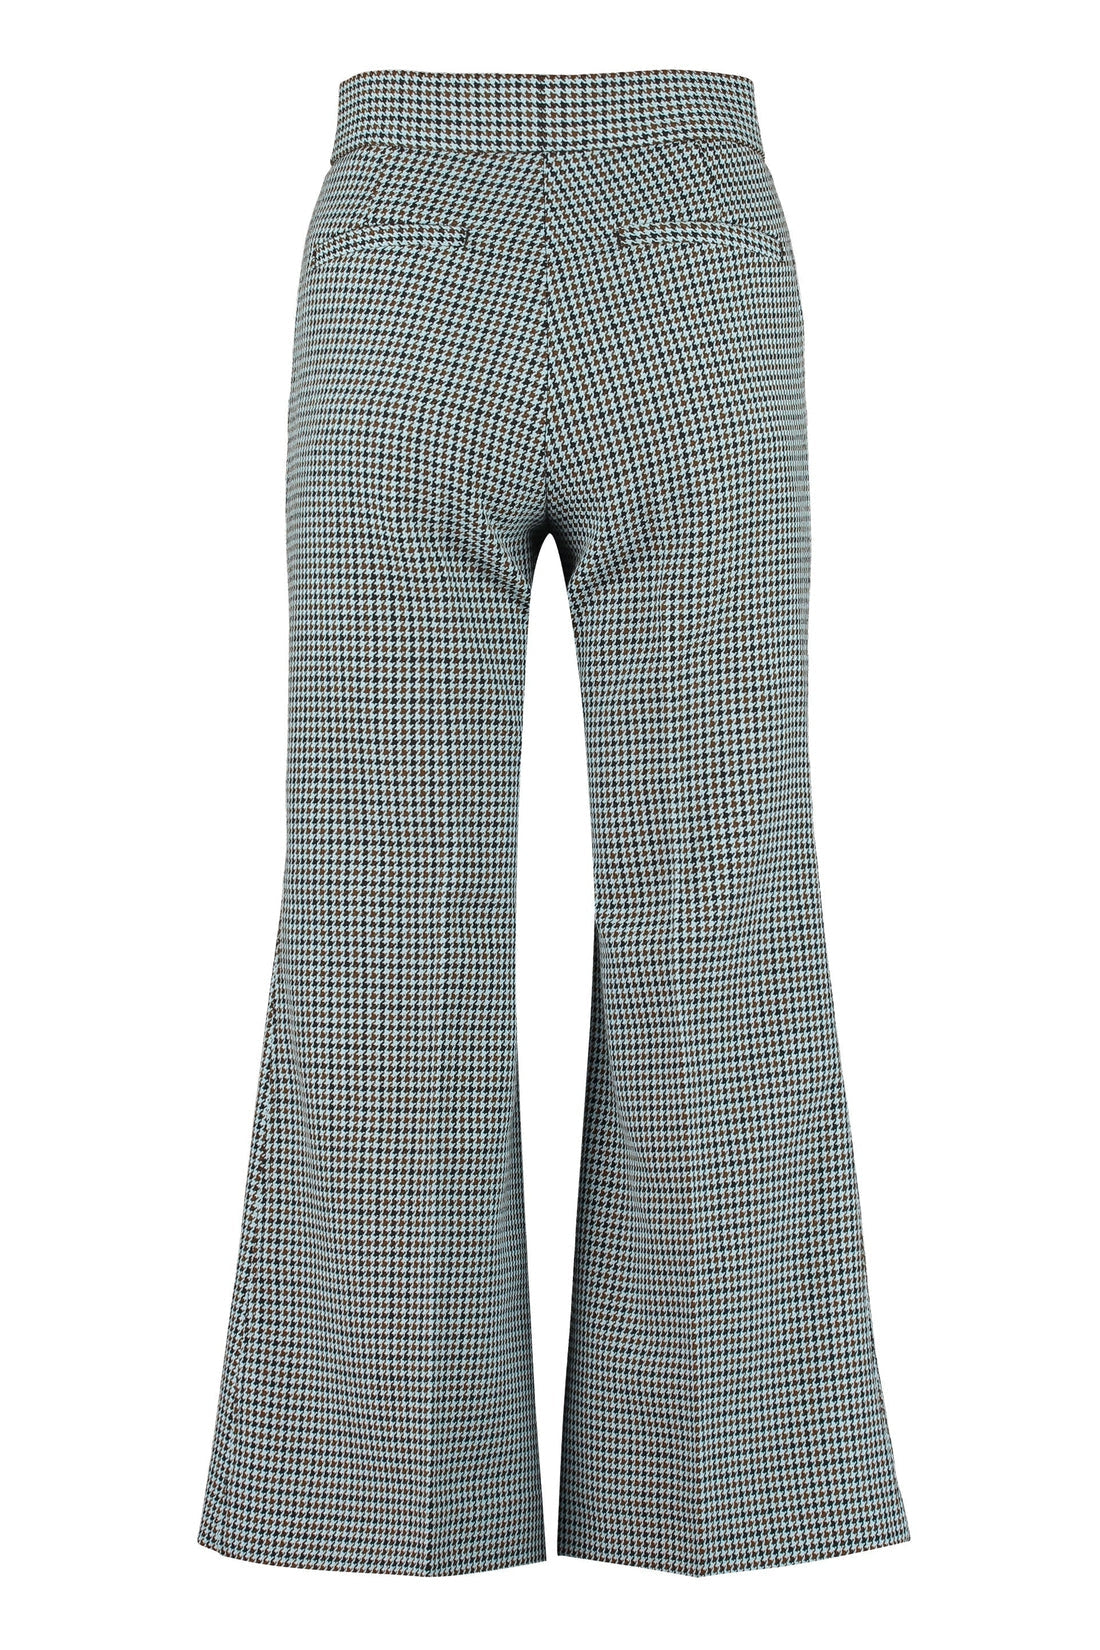 Moncler-OUTLET-SALE-2 Moncler 1952 - Micro houndstooth trousers-ARCHIVIST